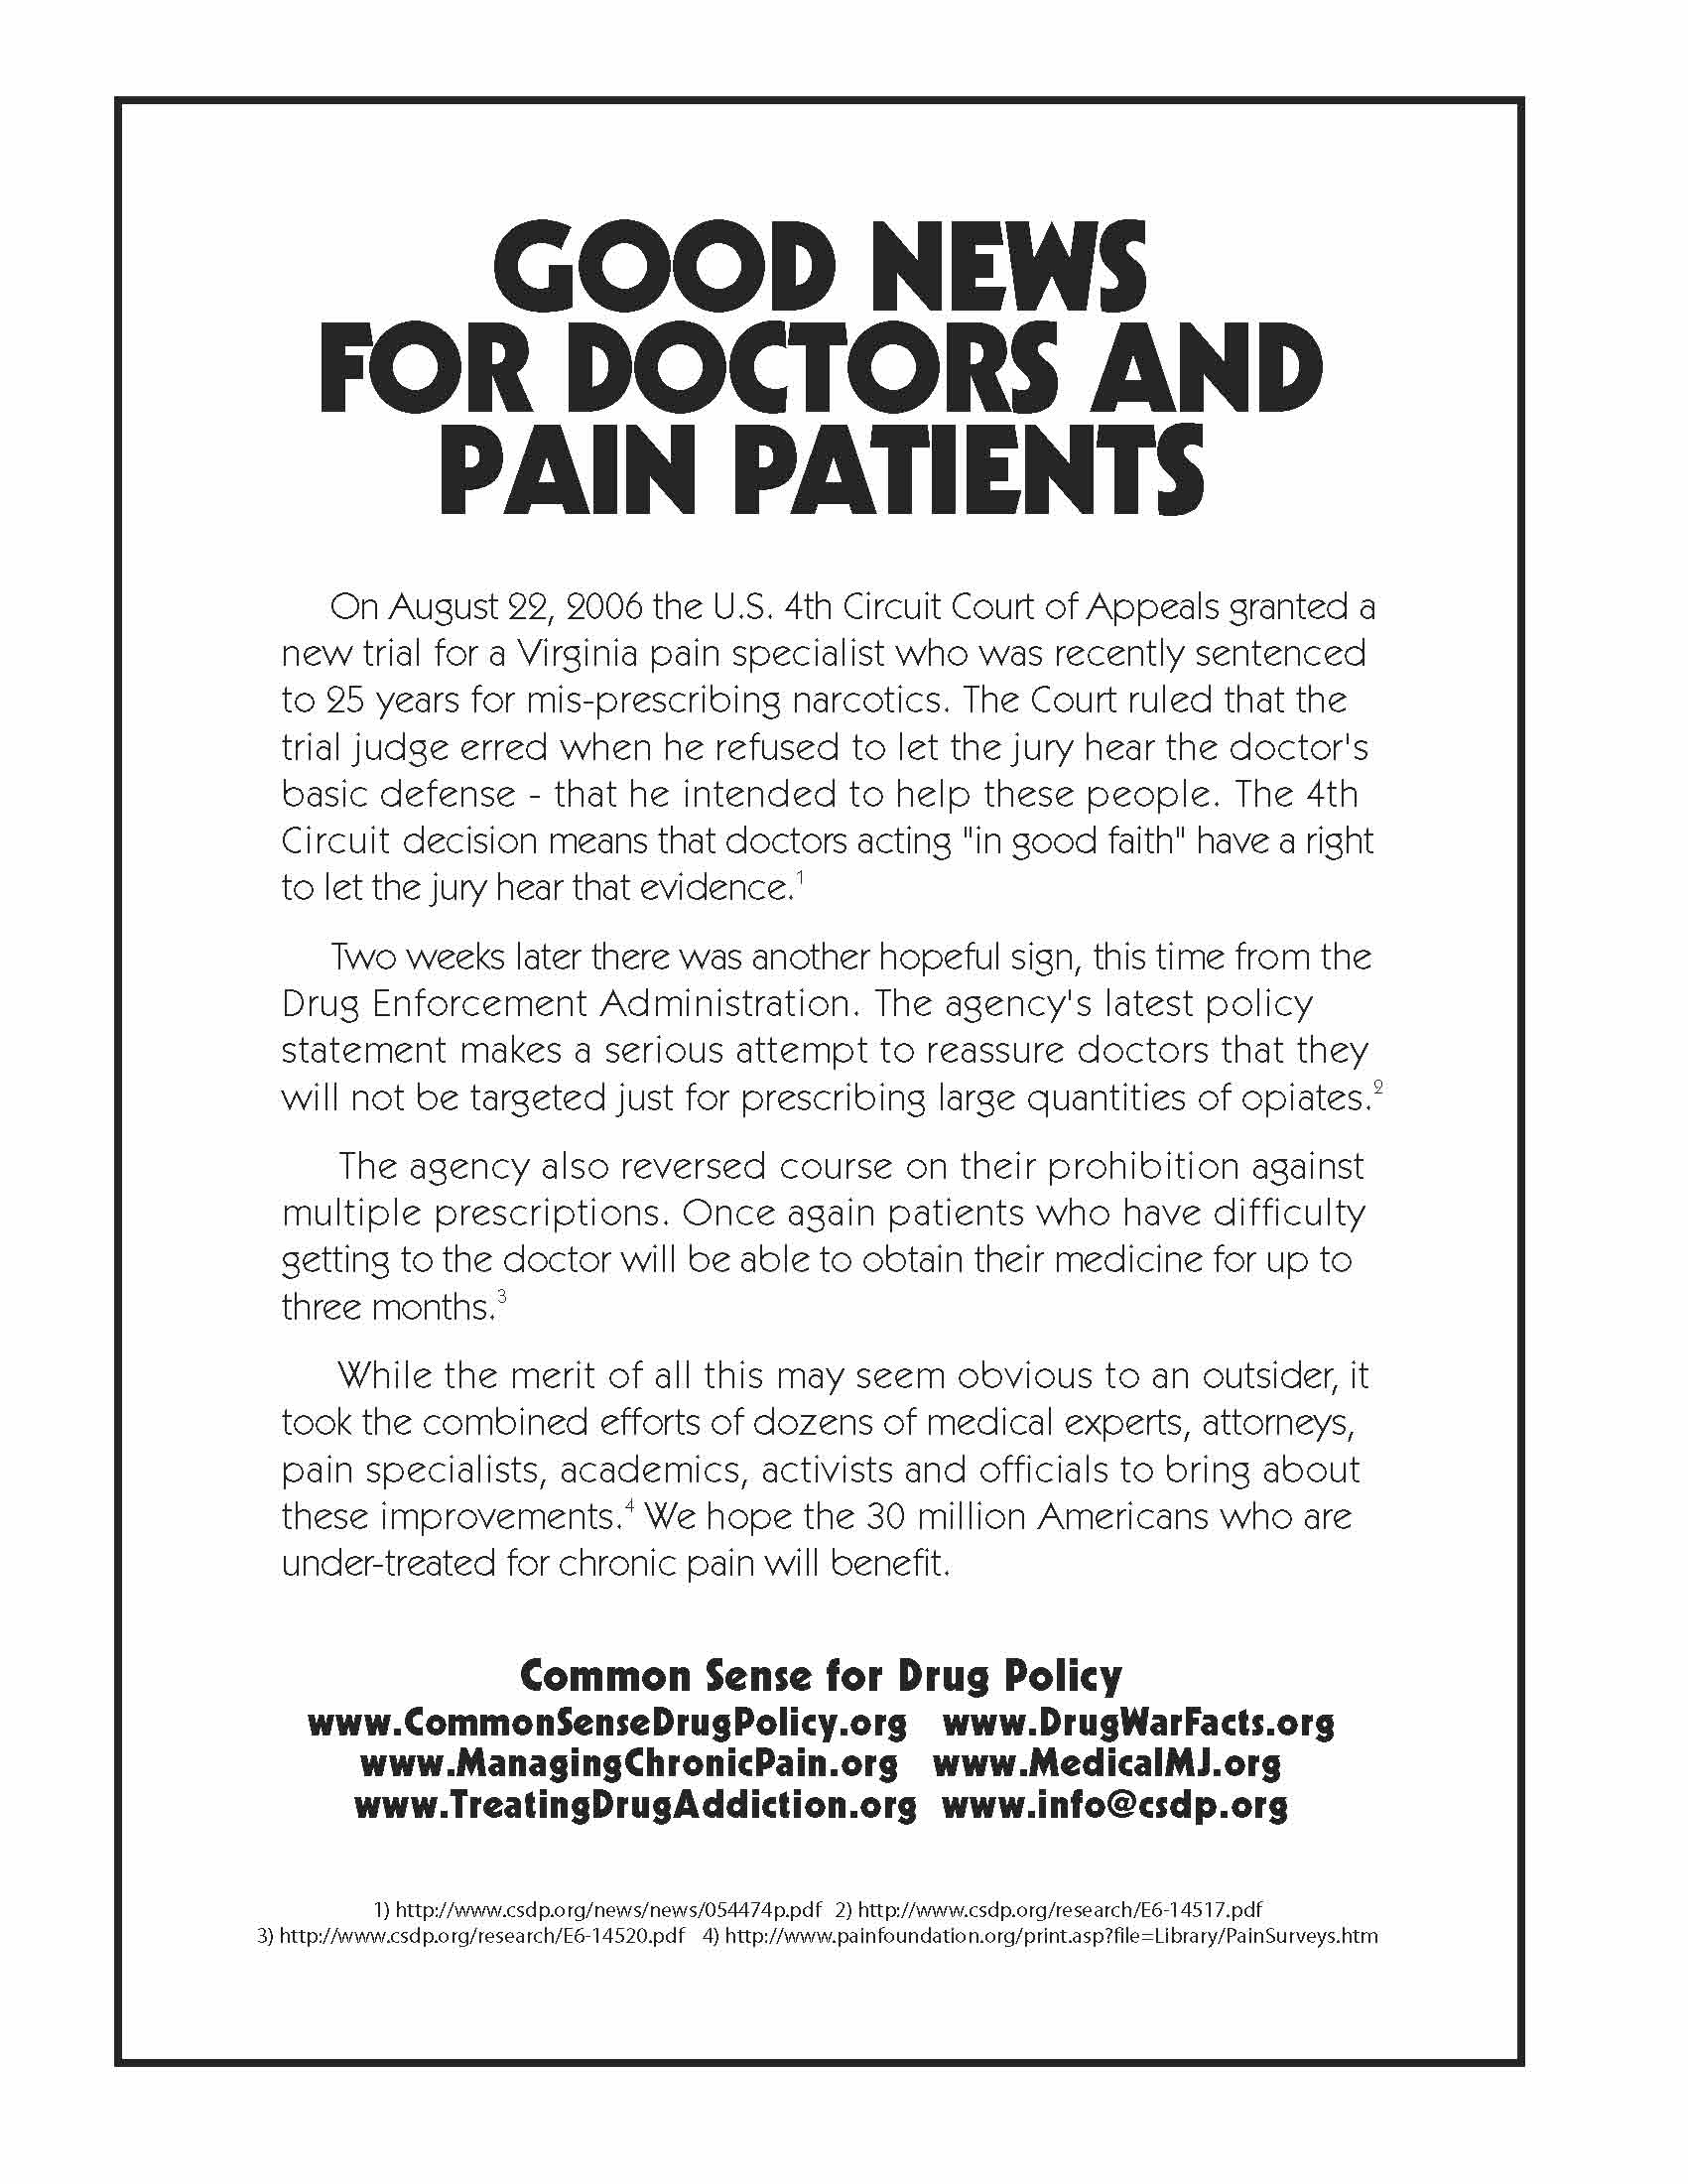 Good News for Doctors and Pain Patients